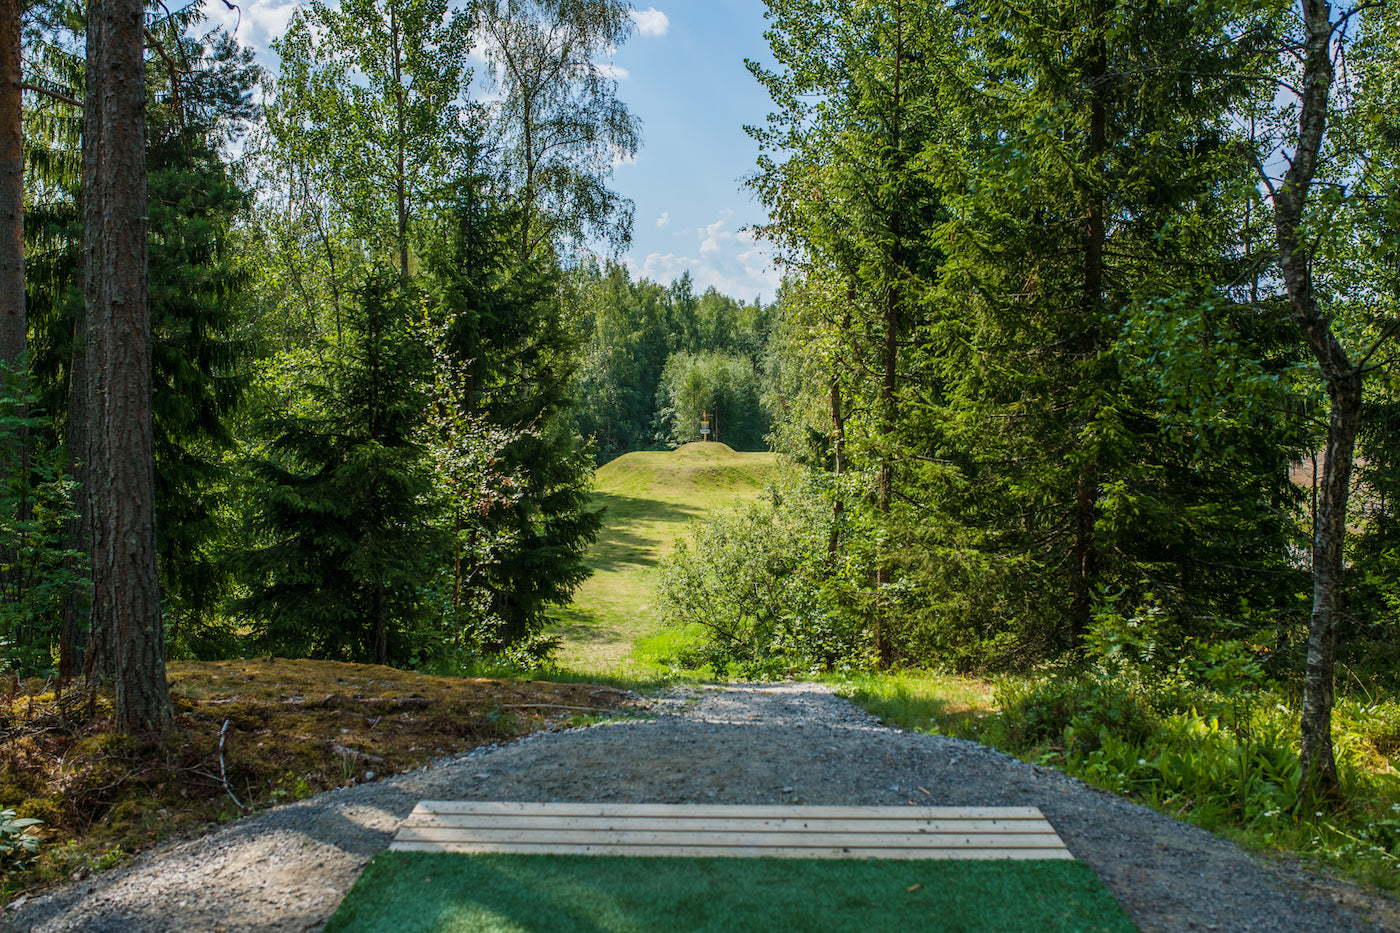 Hole 17 of the Tampere Disc Golf Center.